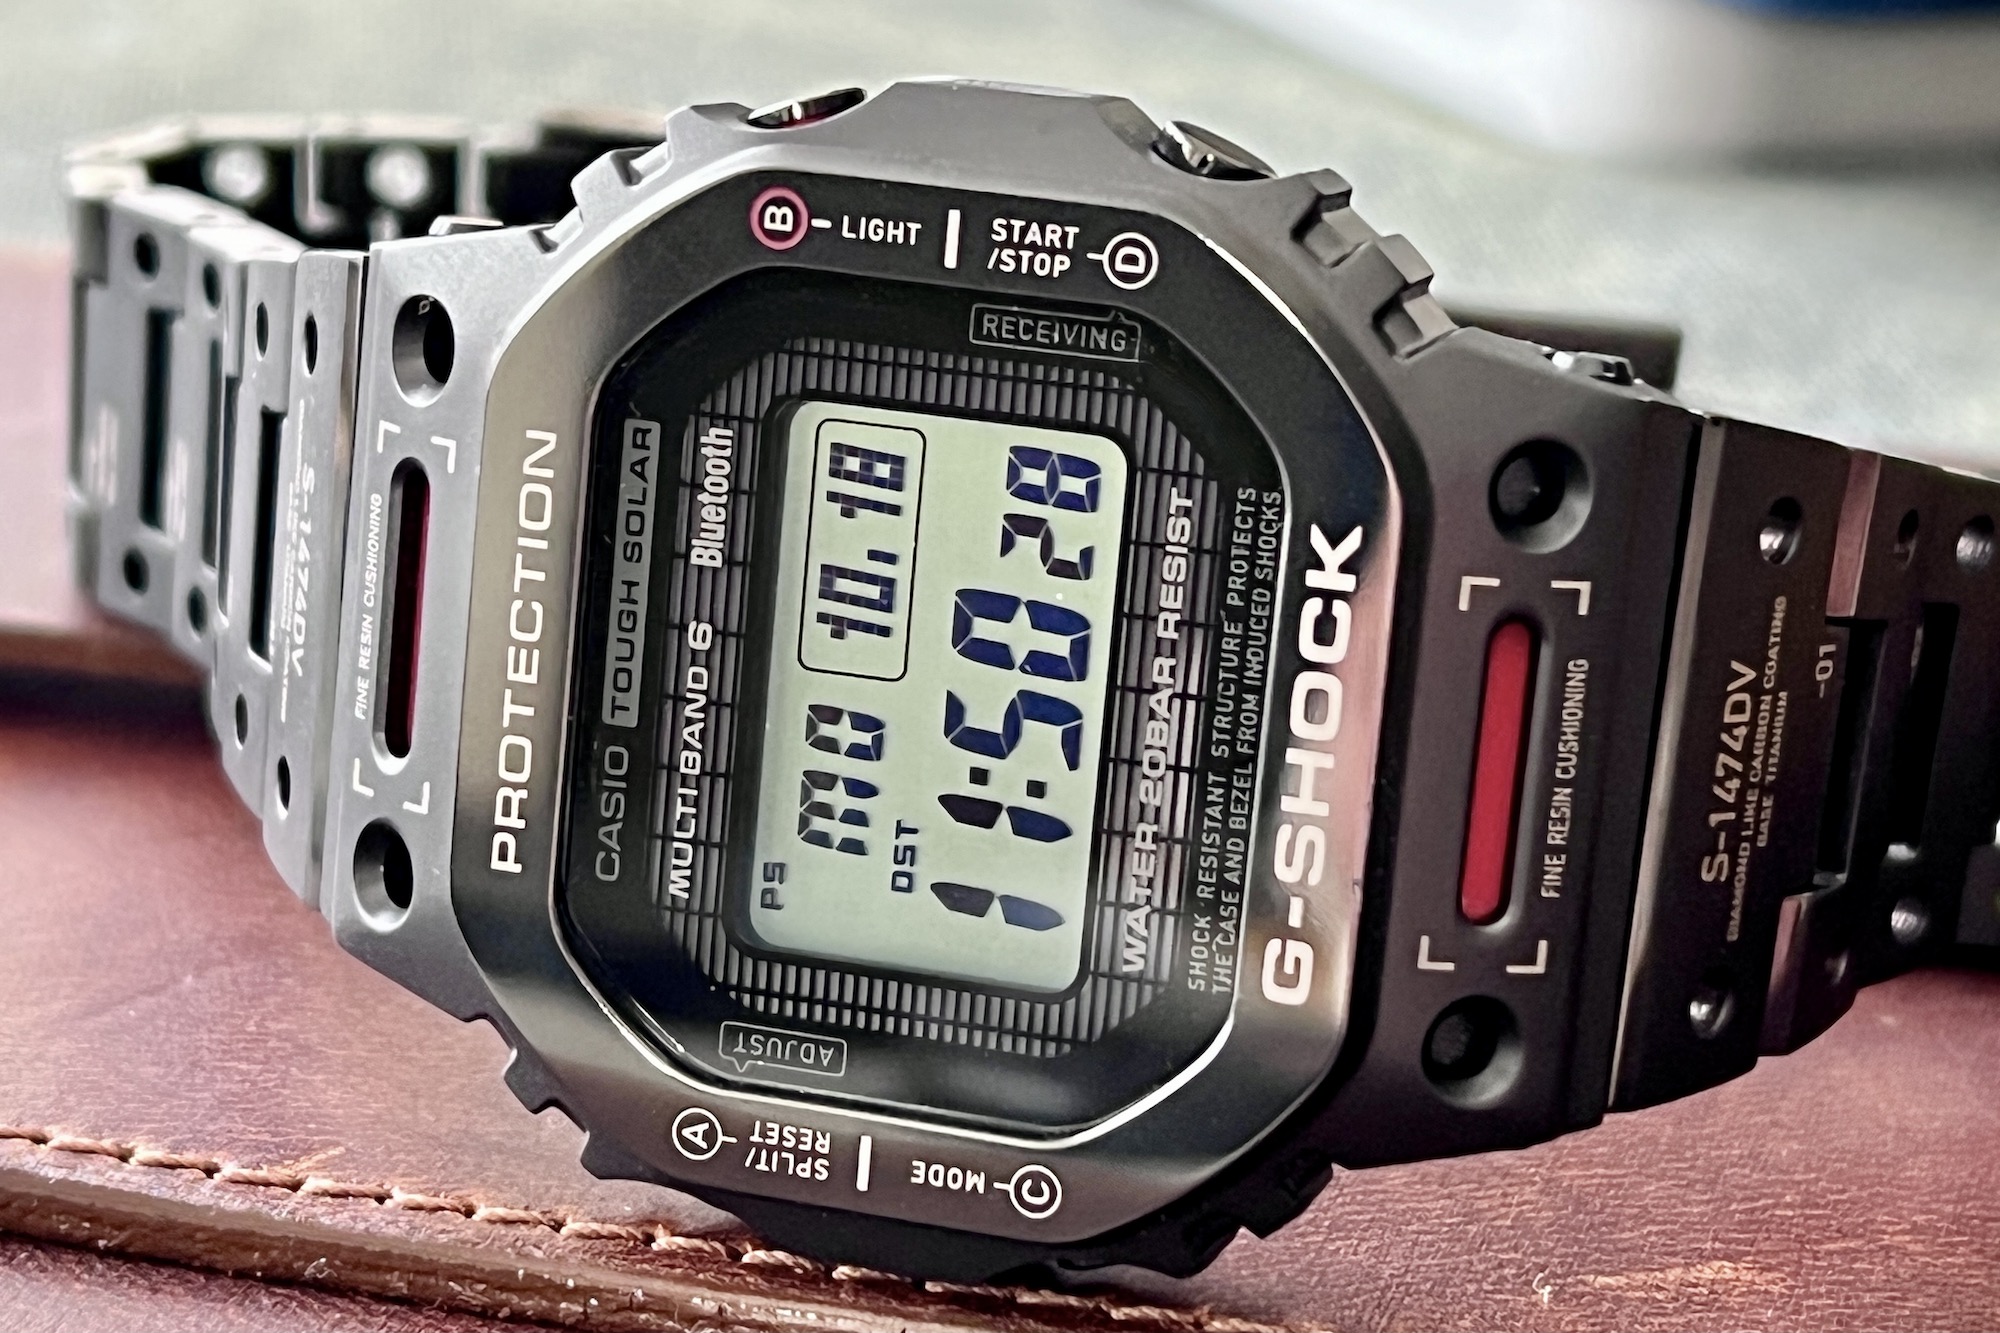 The G-Shock GMW-B5000TVA is a Sci-Fi Inspired Design | Digital Trends